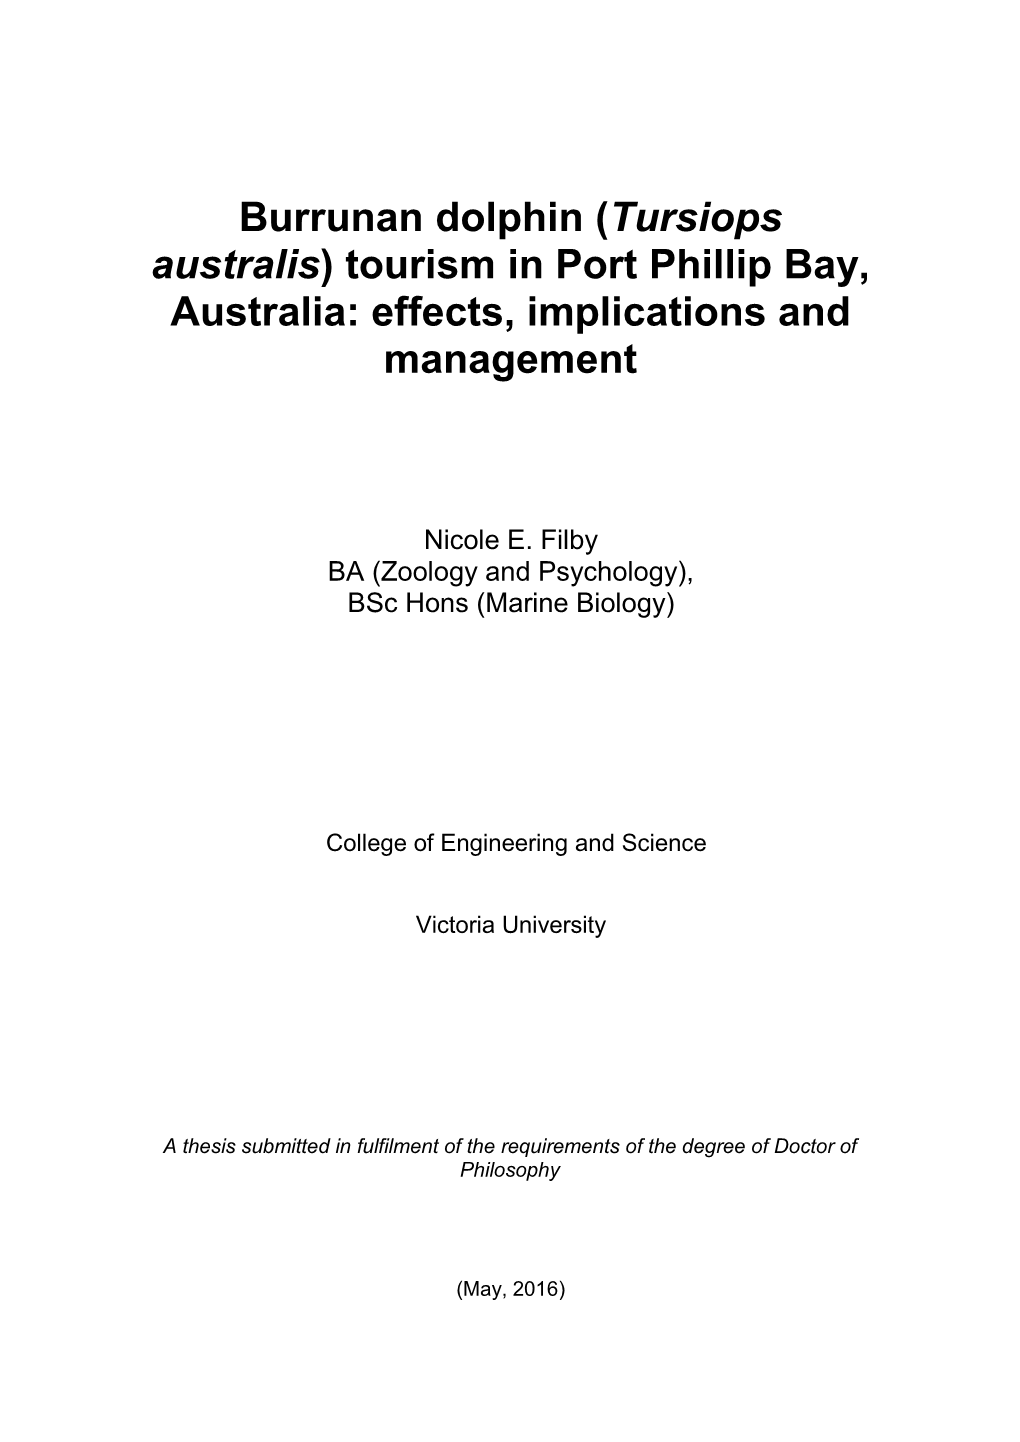 Burrunan Dolphin (Tursiops Australis) Tourism in Port Phillip Bay, Australia: Effects, Implications and Management